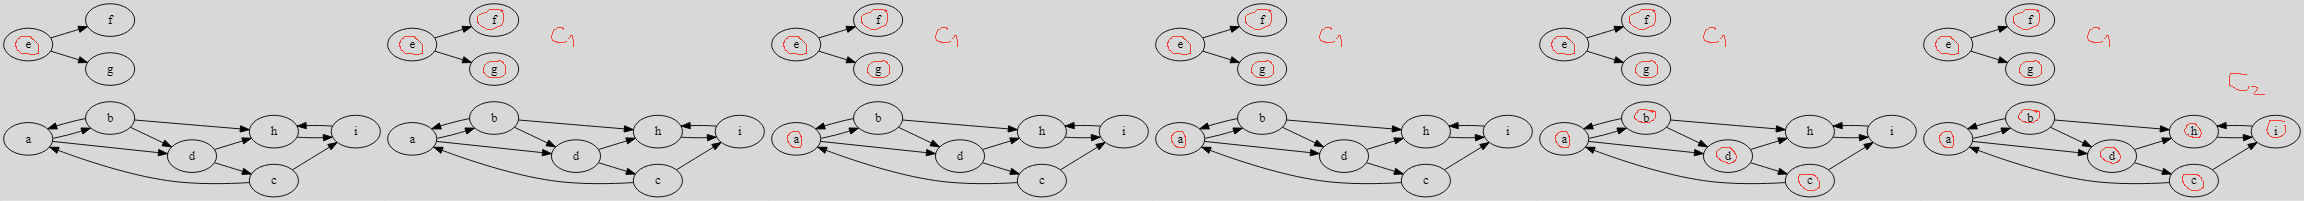 Example 1 - connected algorithm